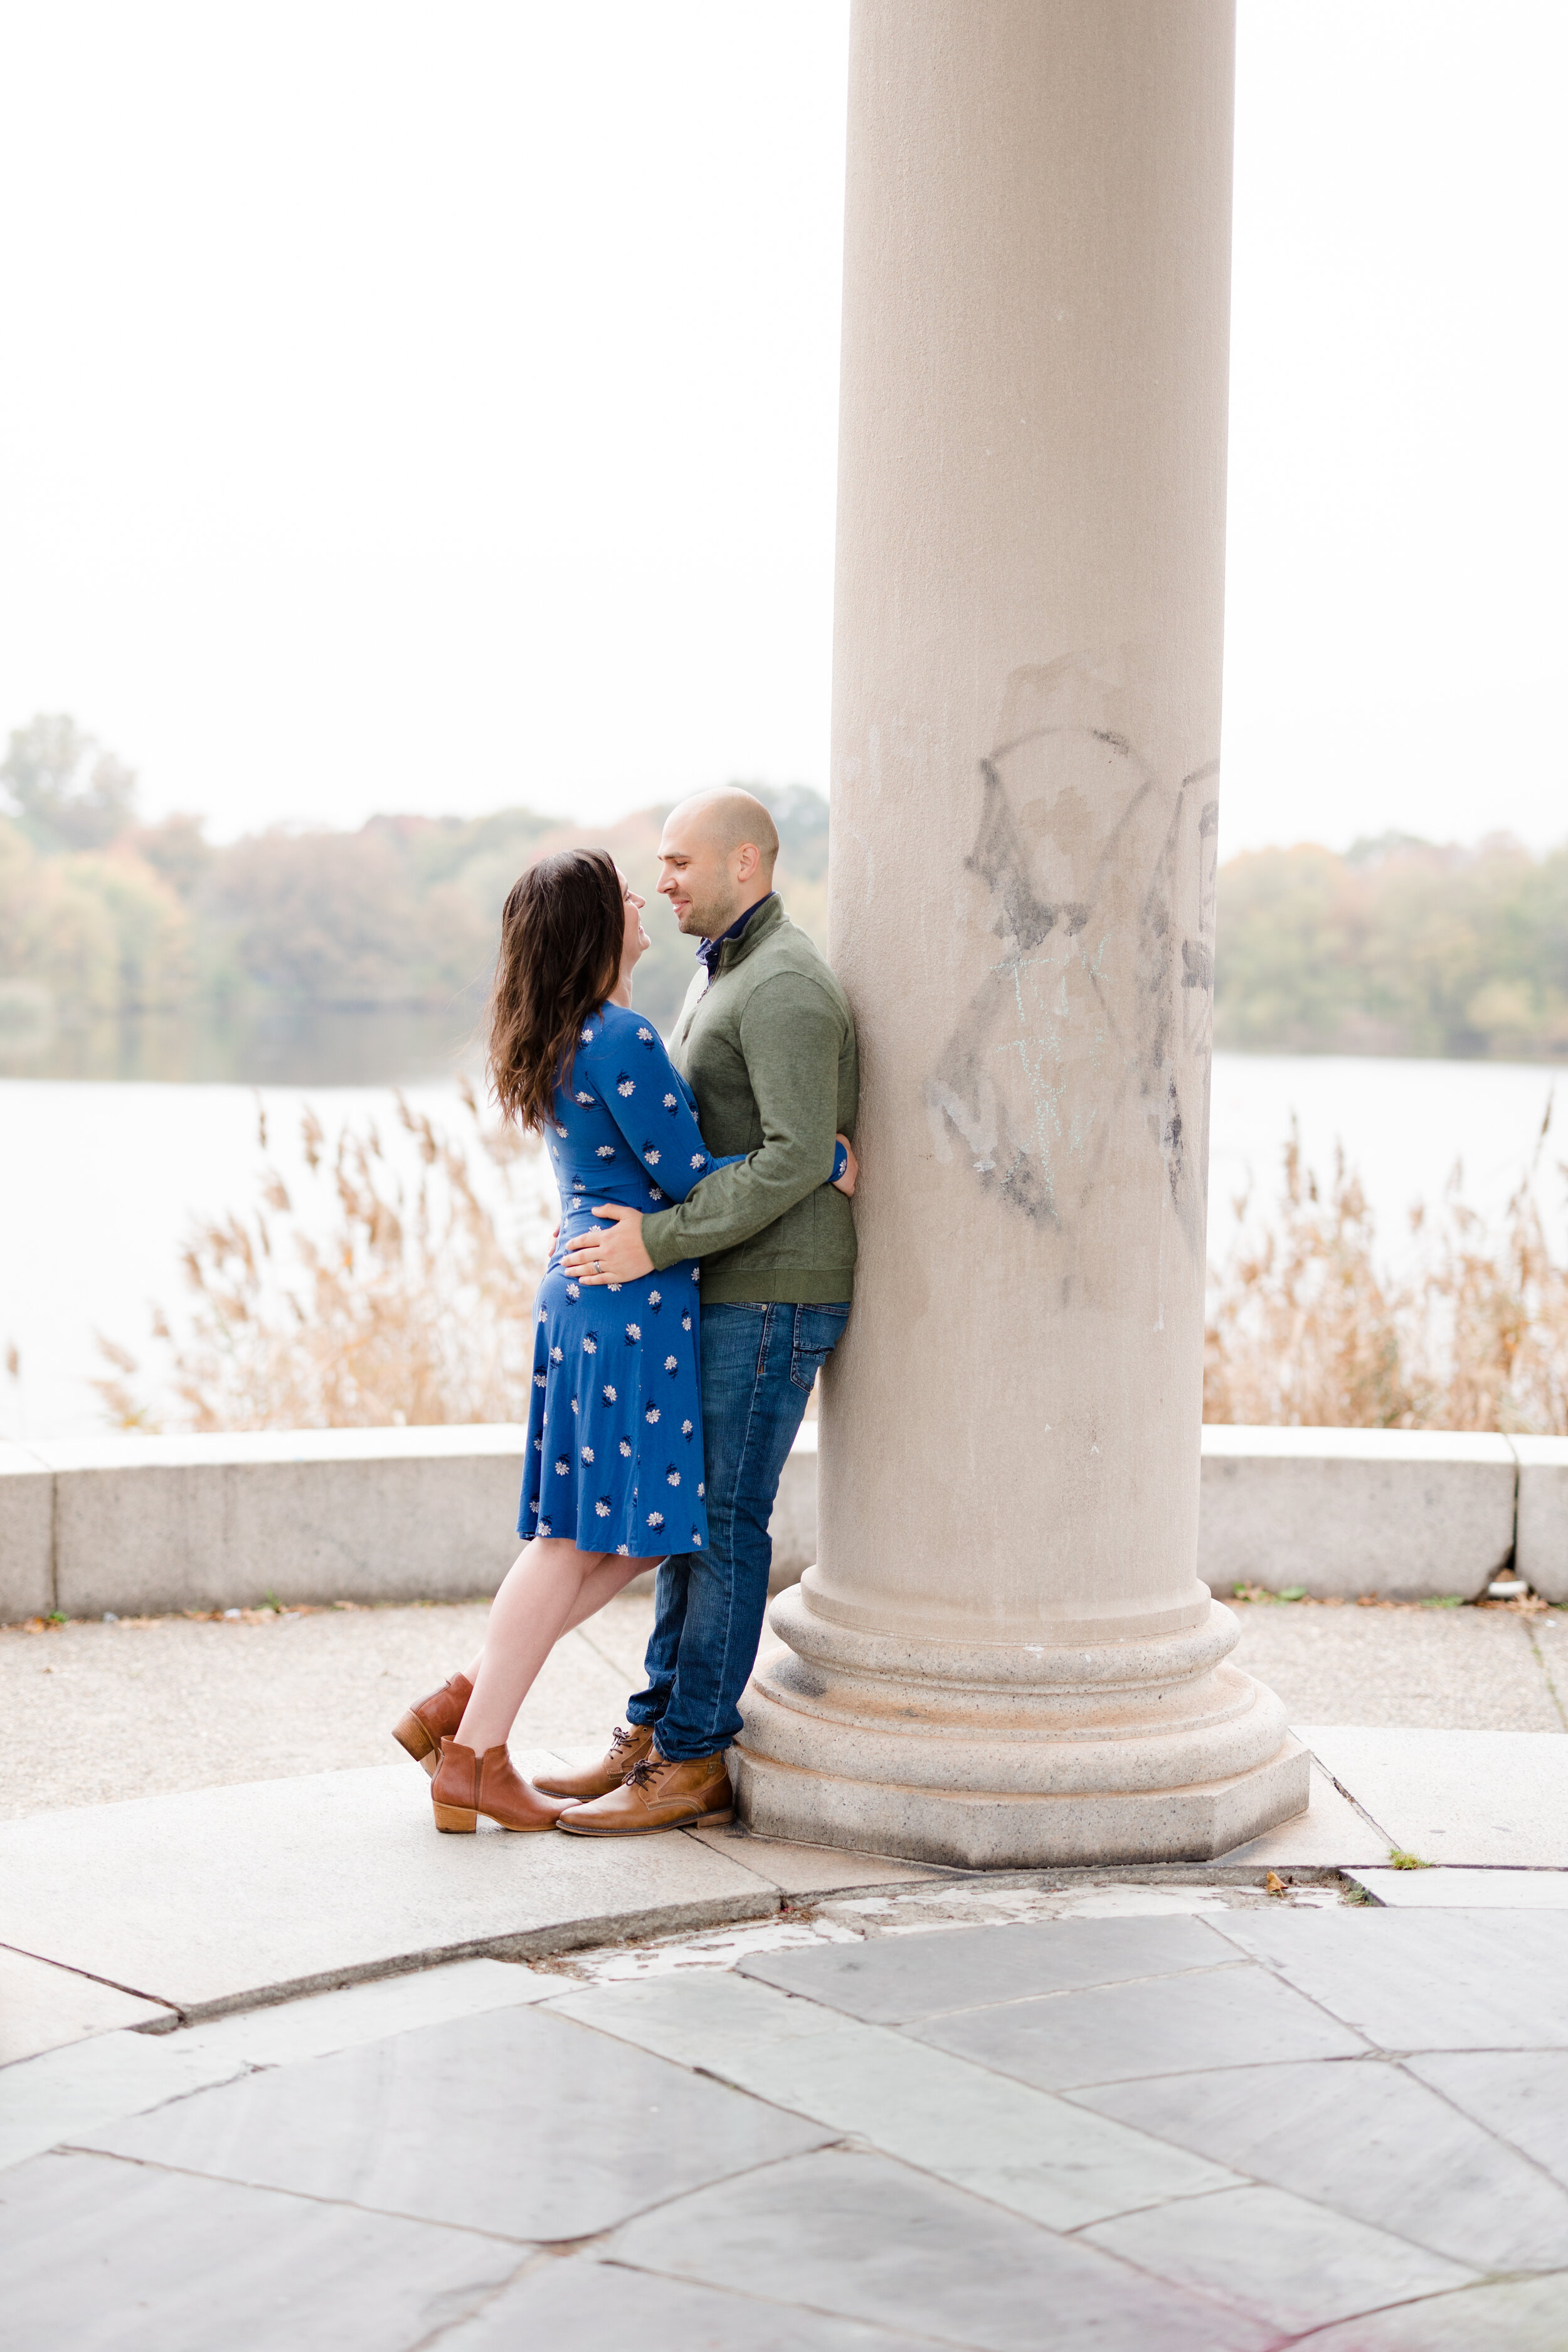 South-Philly-FDR-Park-Fall-Engagement-Session-11.jpg